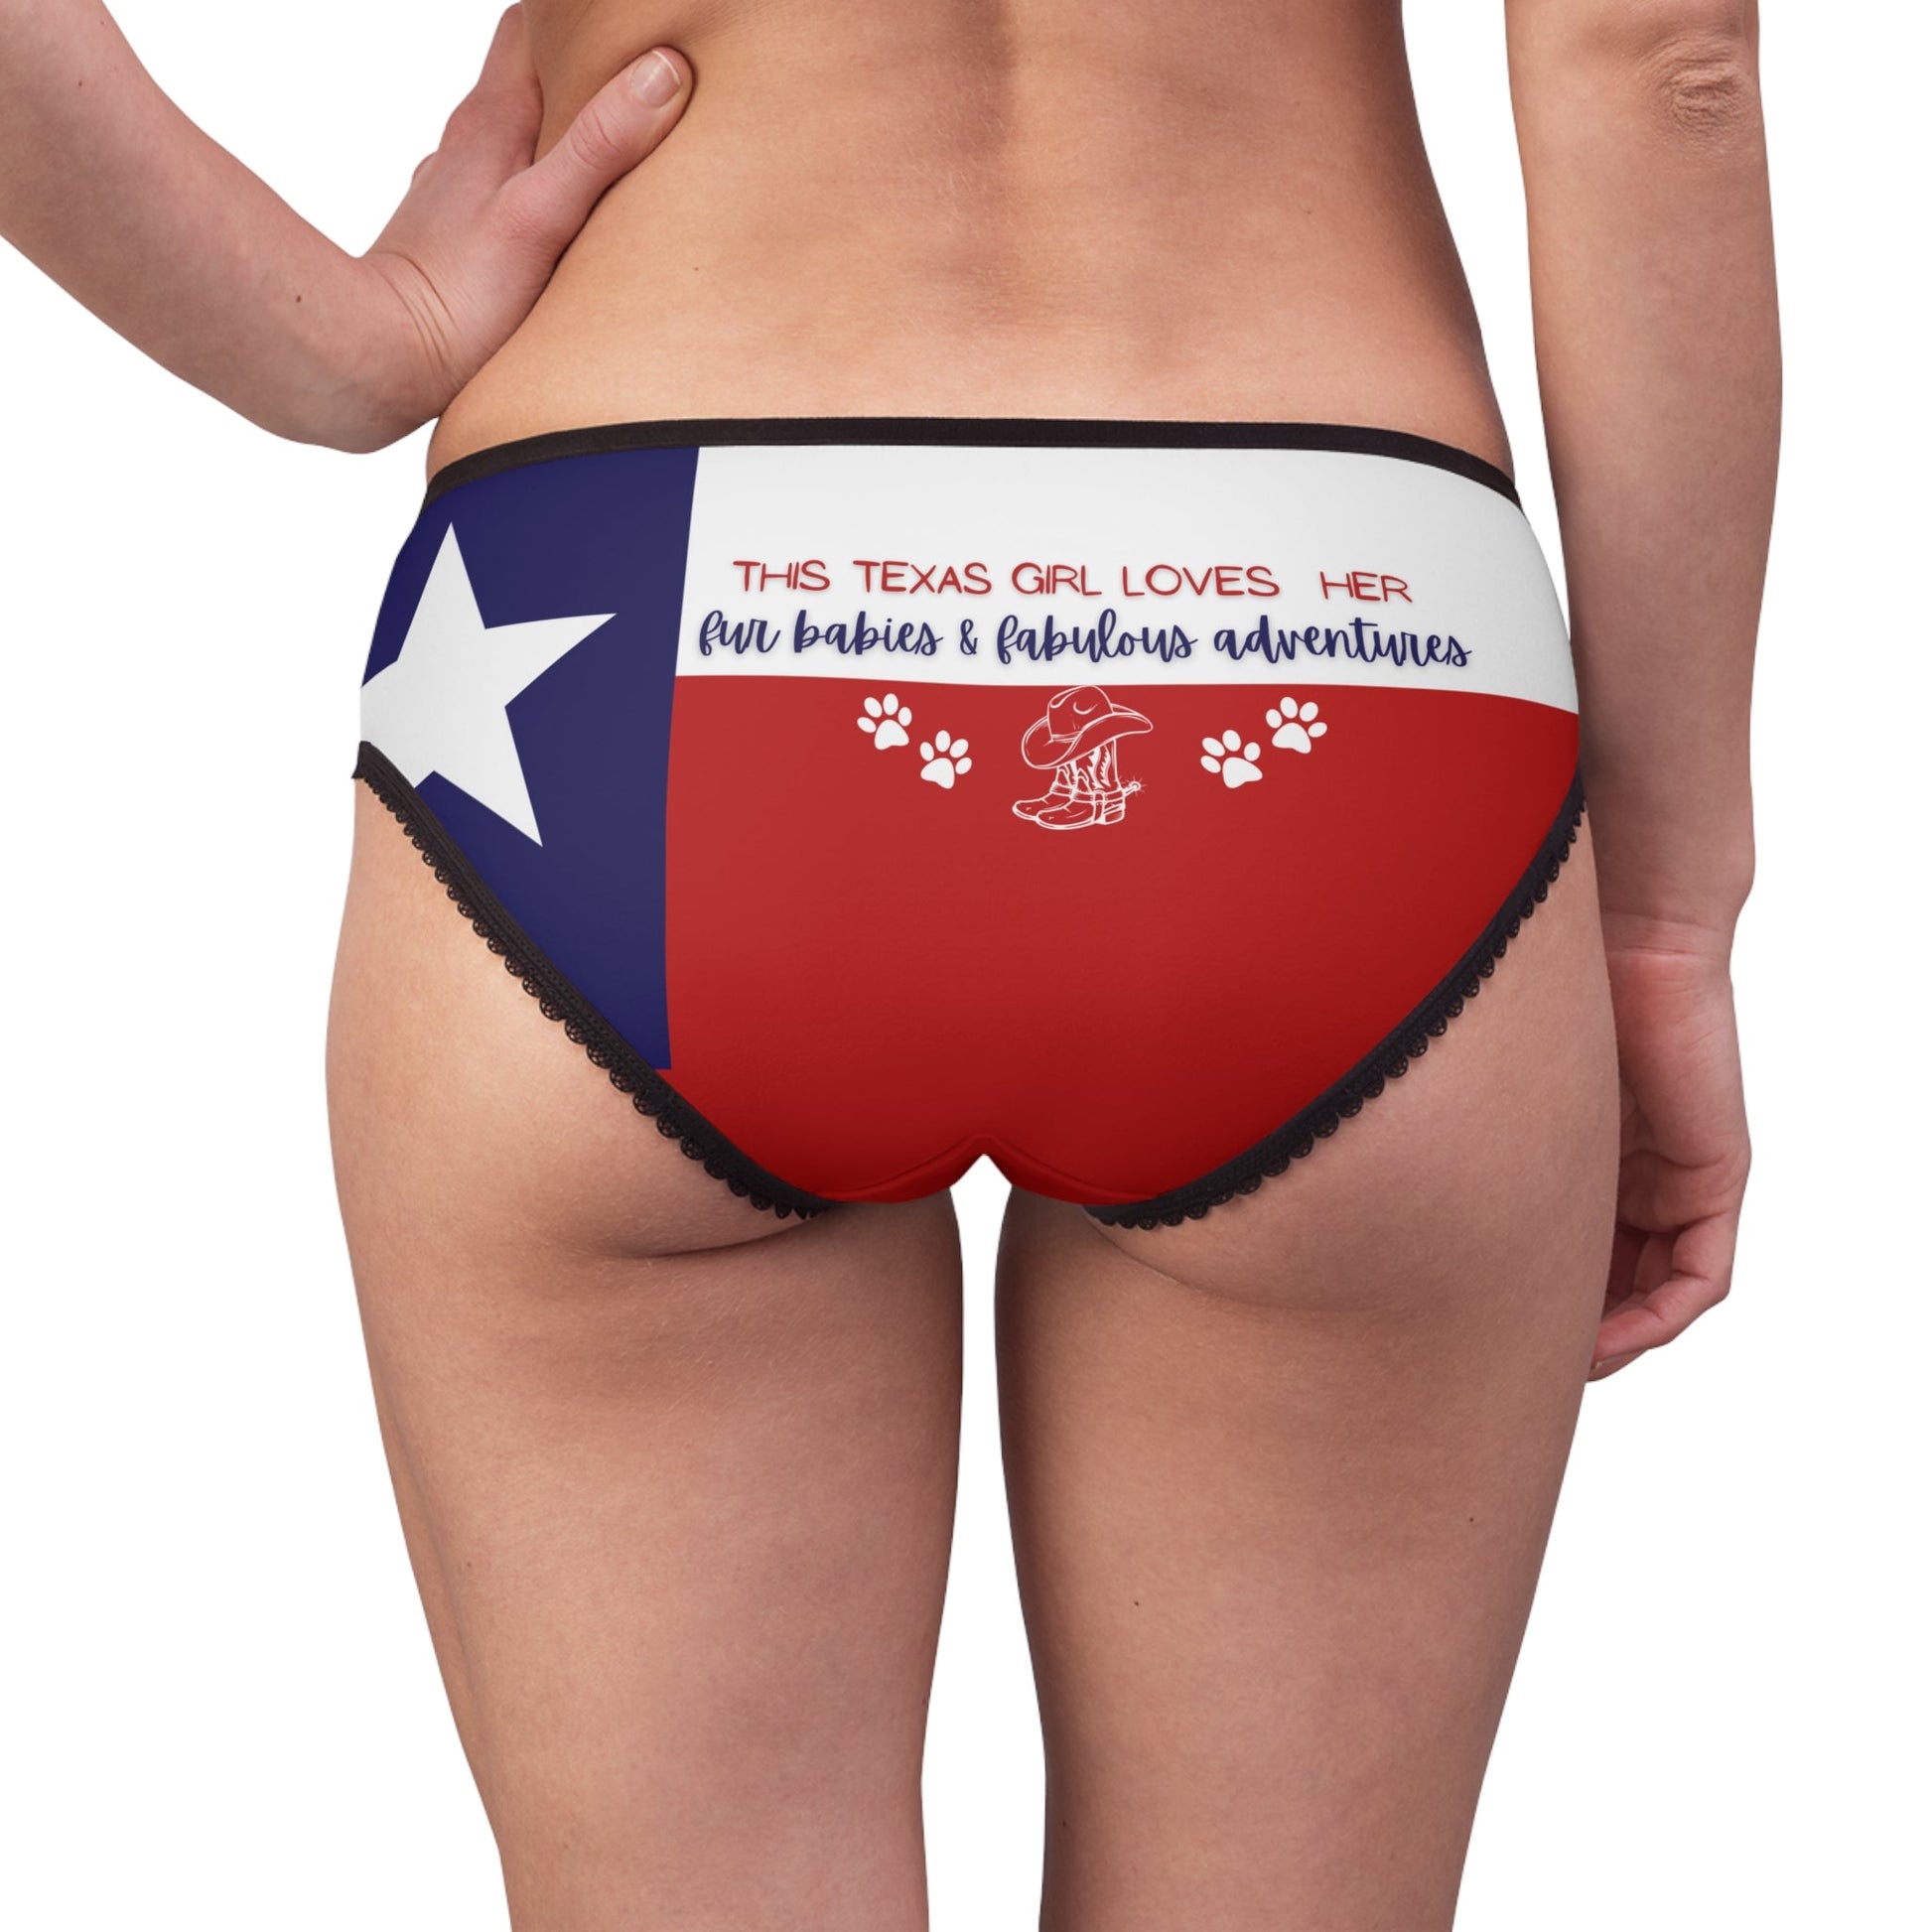 Texas Girl Loves Undies - All Over Prints